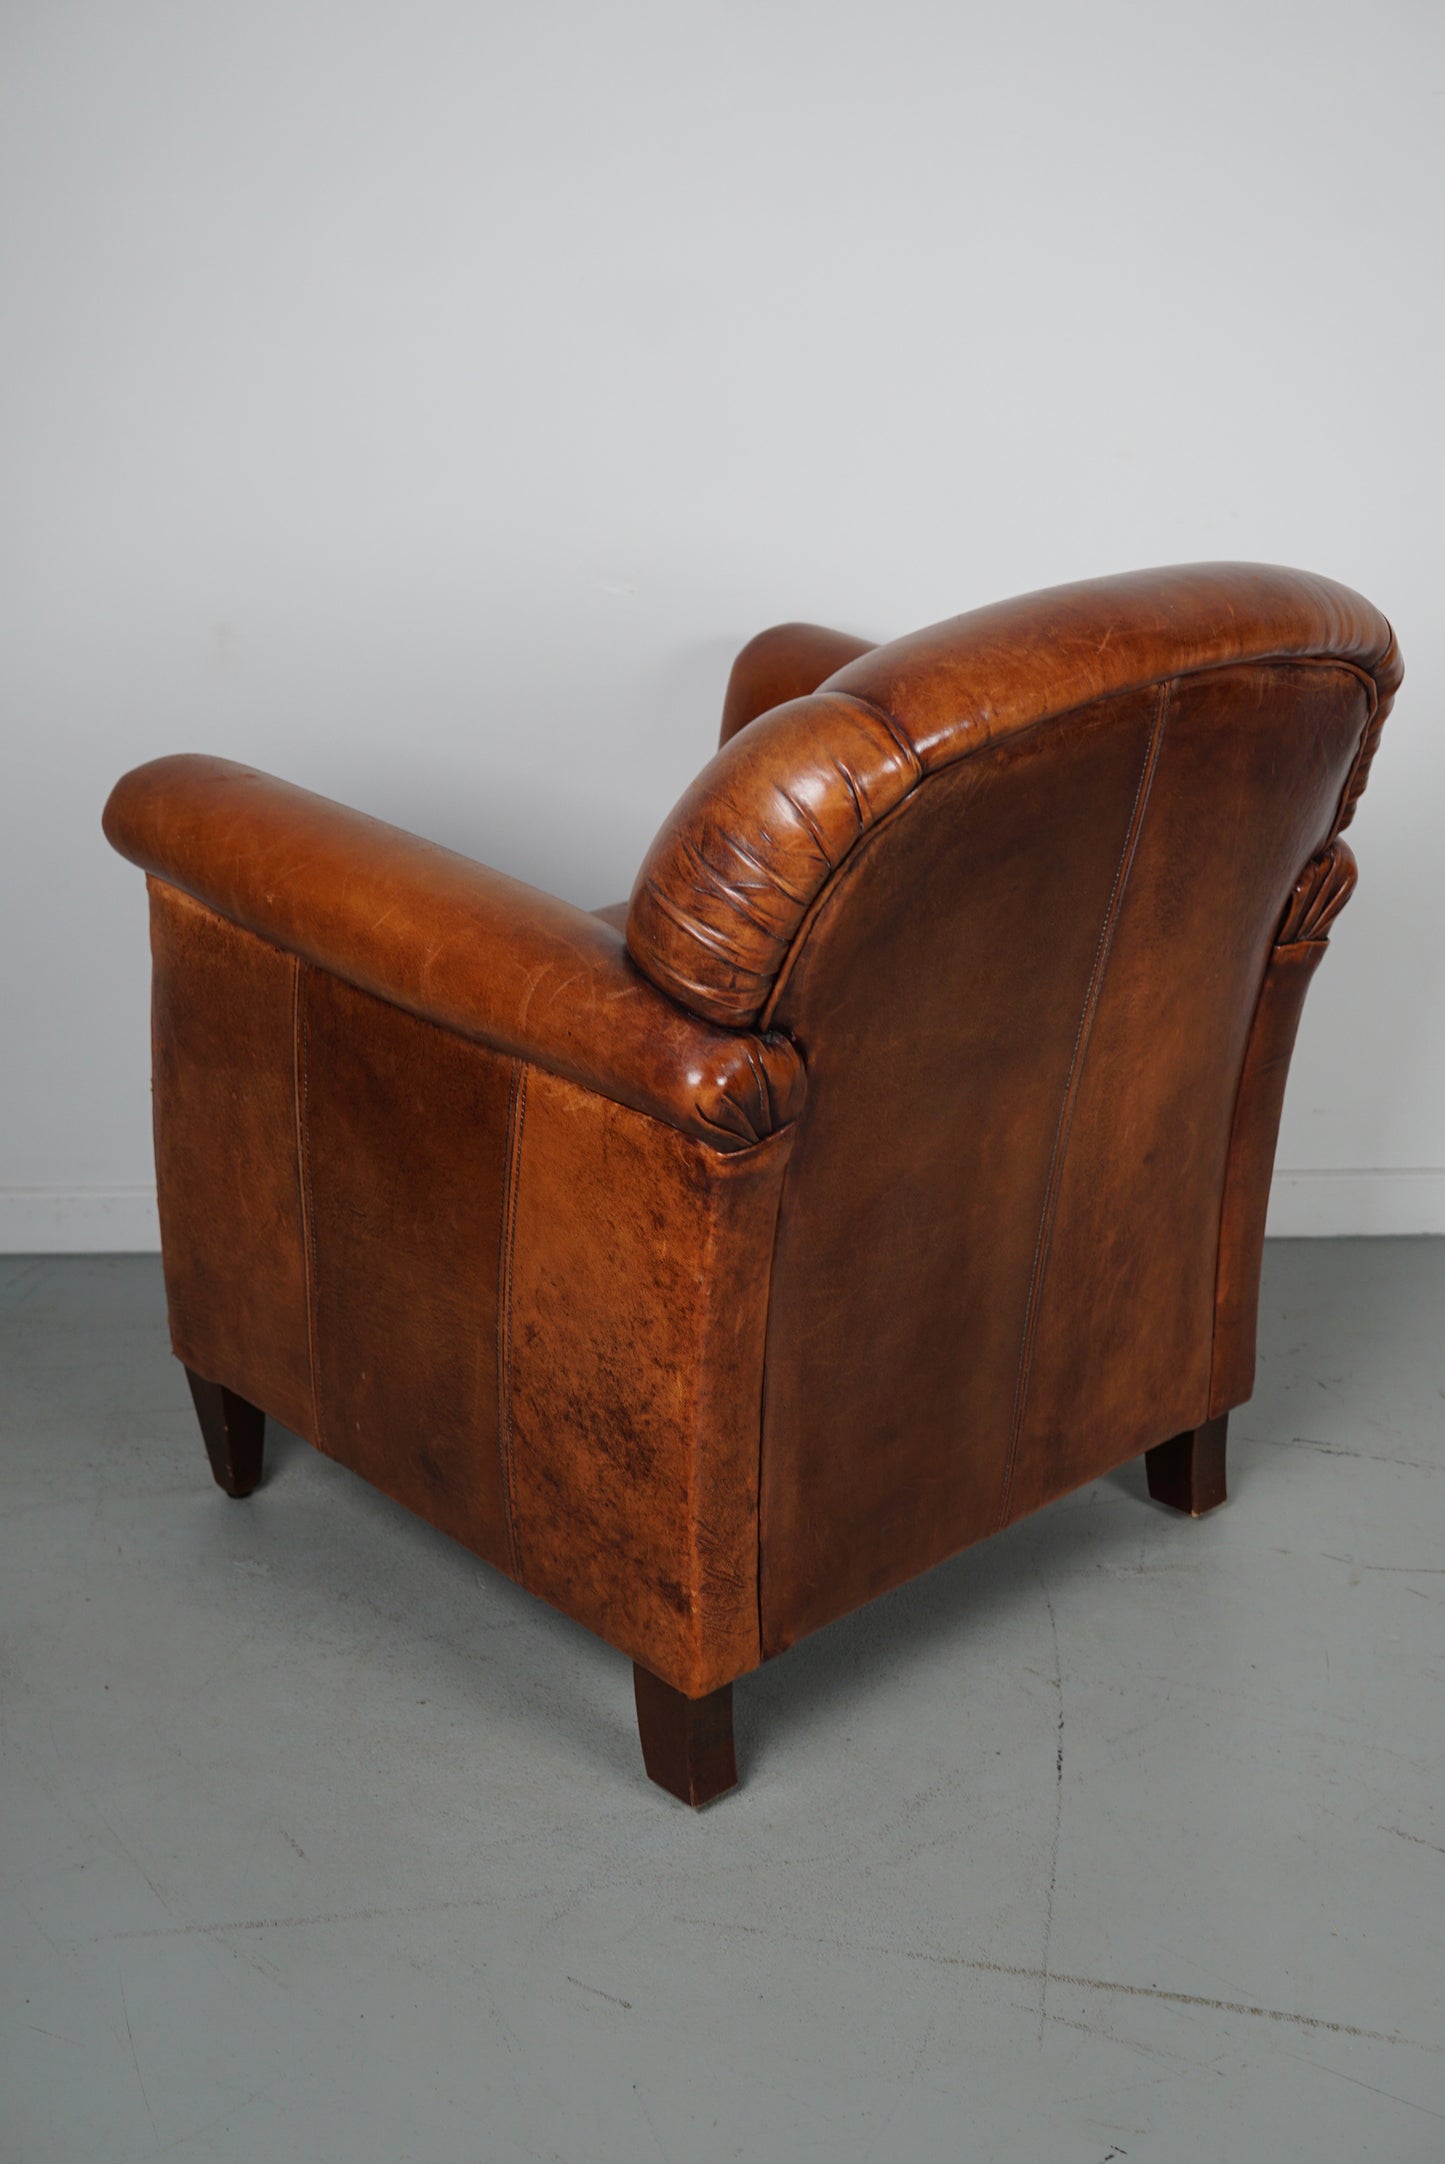 Vintage Dutch Cognac Colored Leather Club Chair, with Footstool